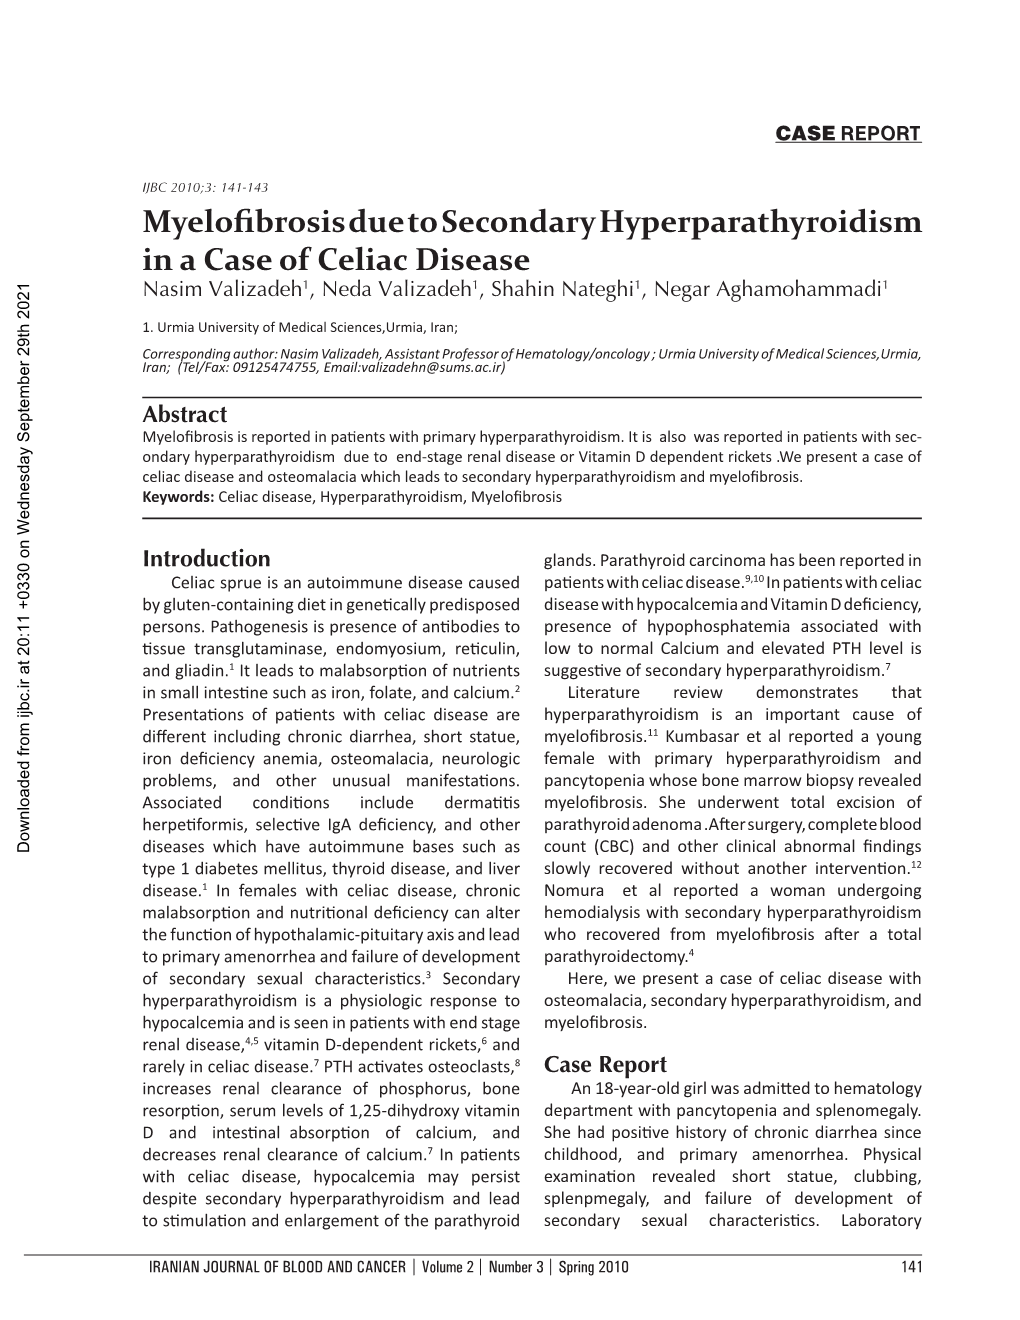 Myelofibrosis Due to Secondary Hyperparathyroidism in a Case Of